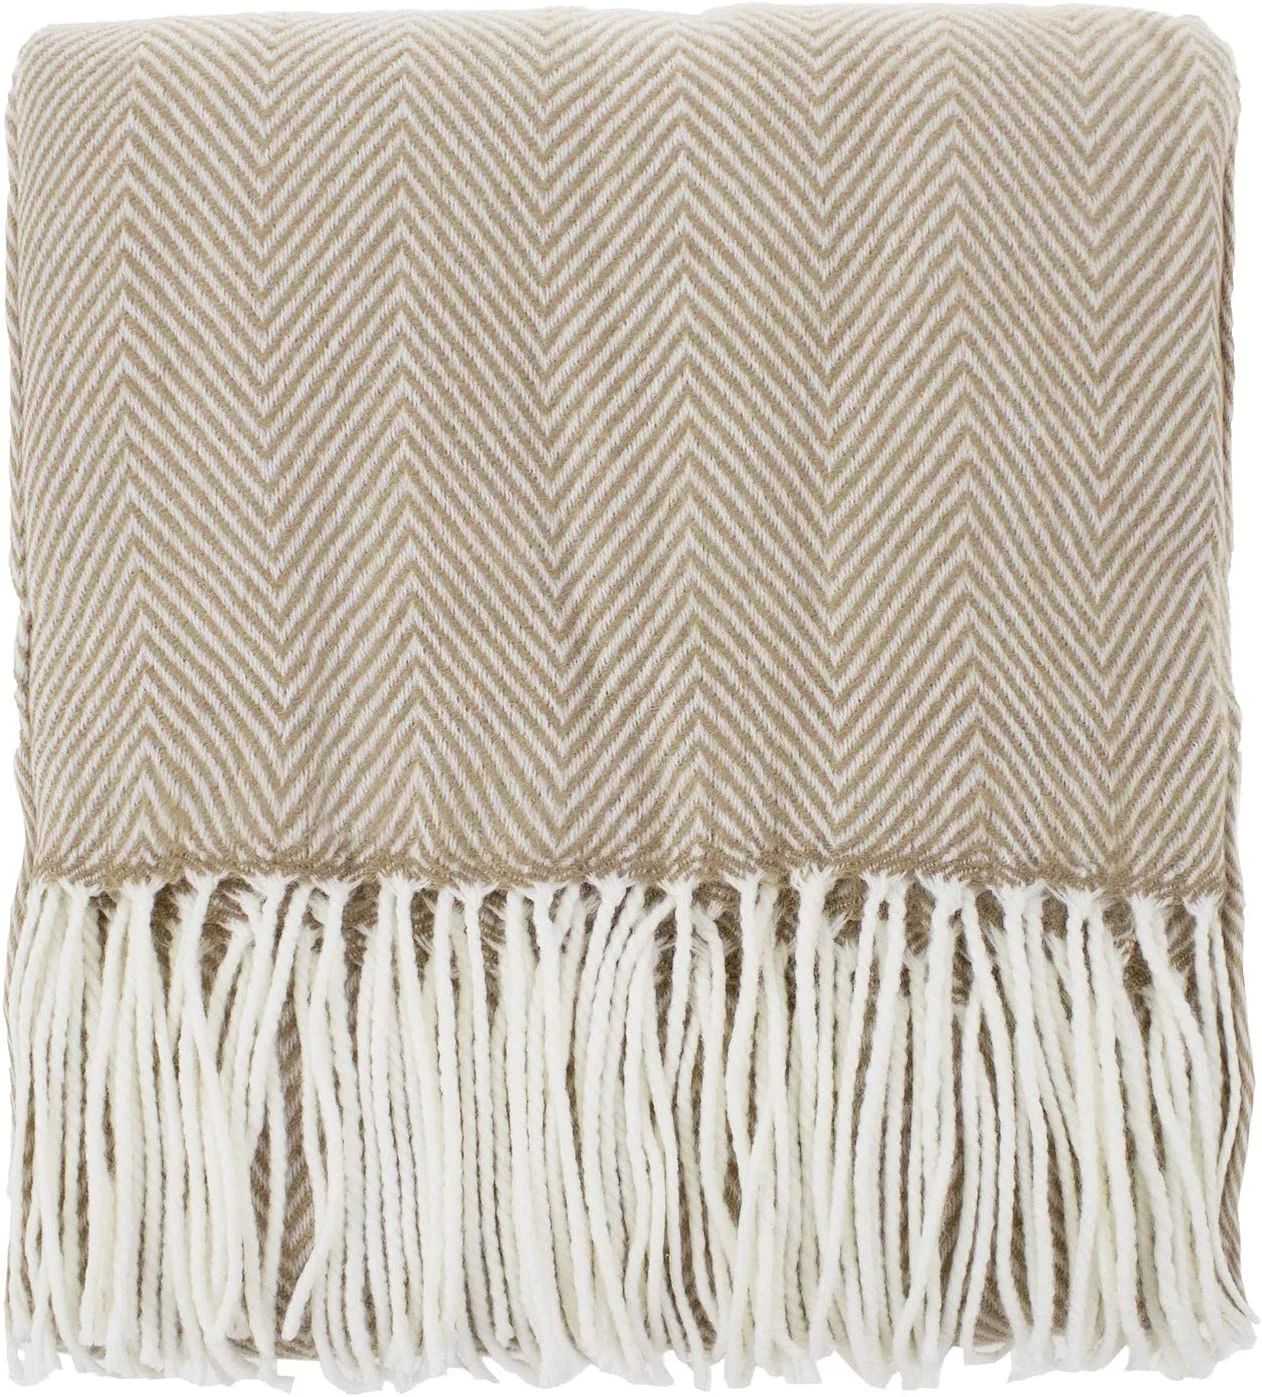 Herringbone Collection Contemporary Fringed 50 X 60 Inch Throw - Camel Throw Blanket For Couch, B... | Walmart (US)